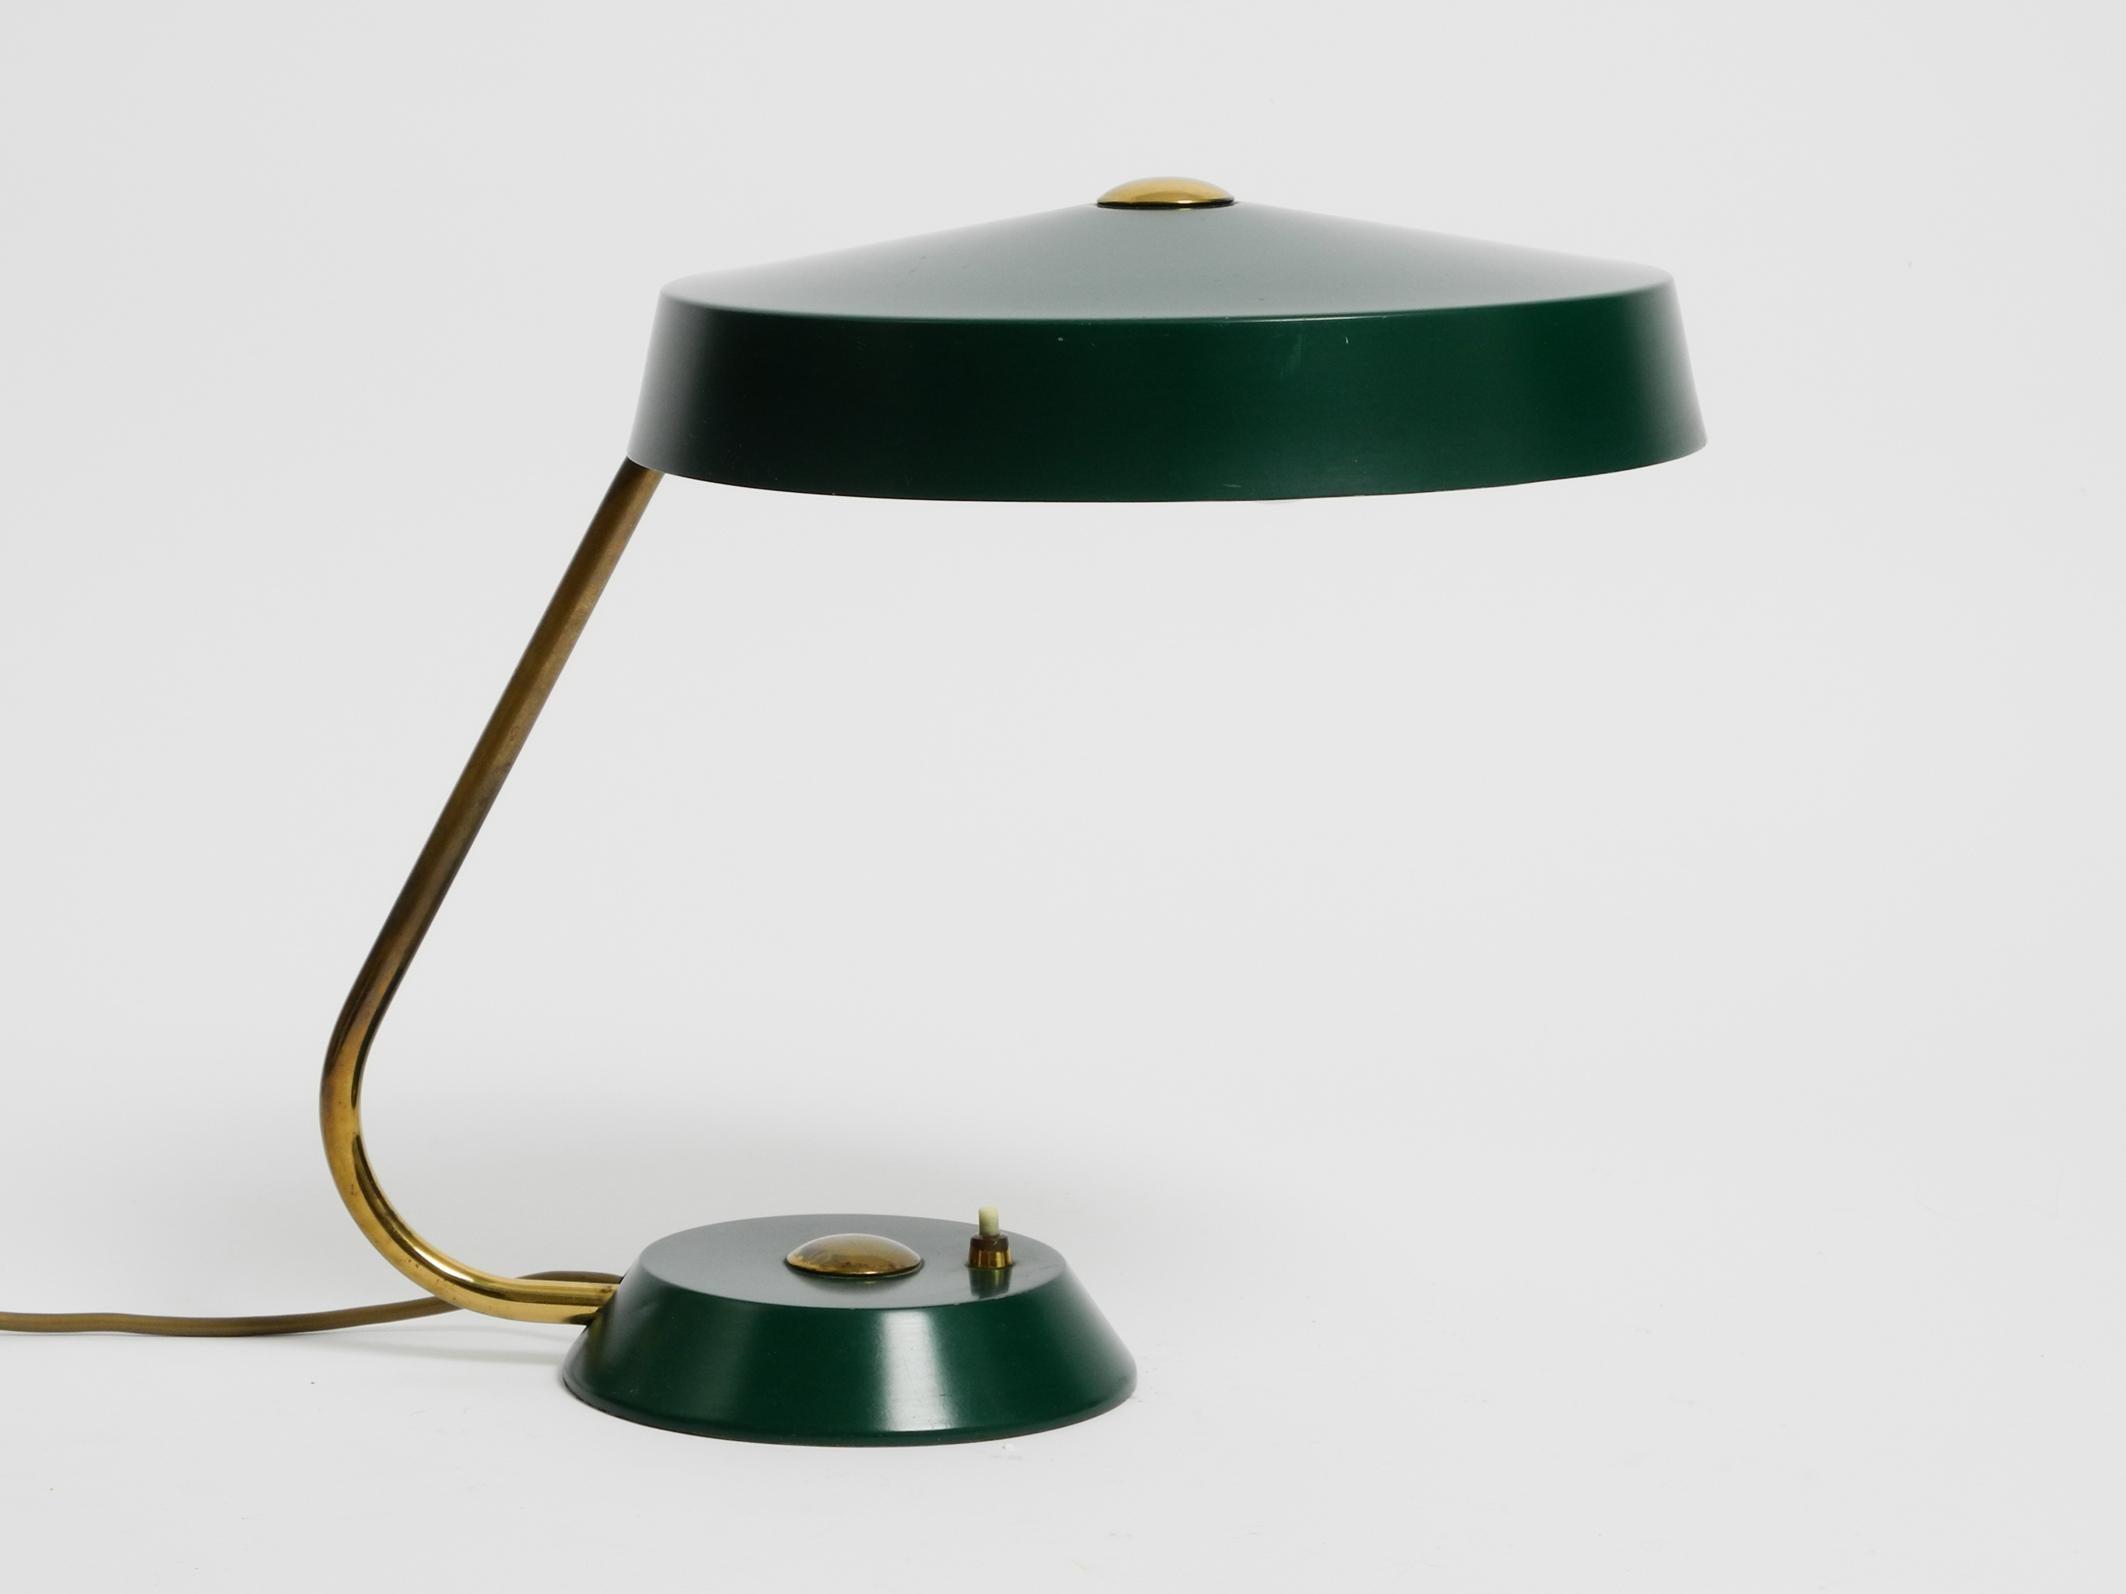 Original large heavy Mid Century Modern metal table lamp. In very rare original British Green. Made in Austria. In very good condition. Almost new. Probably barely used.
100% original condition and fully functional.
One E27 original socket for max